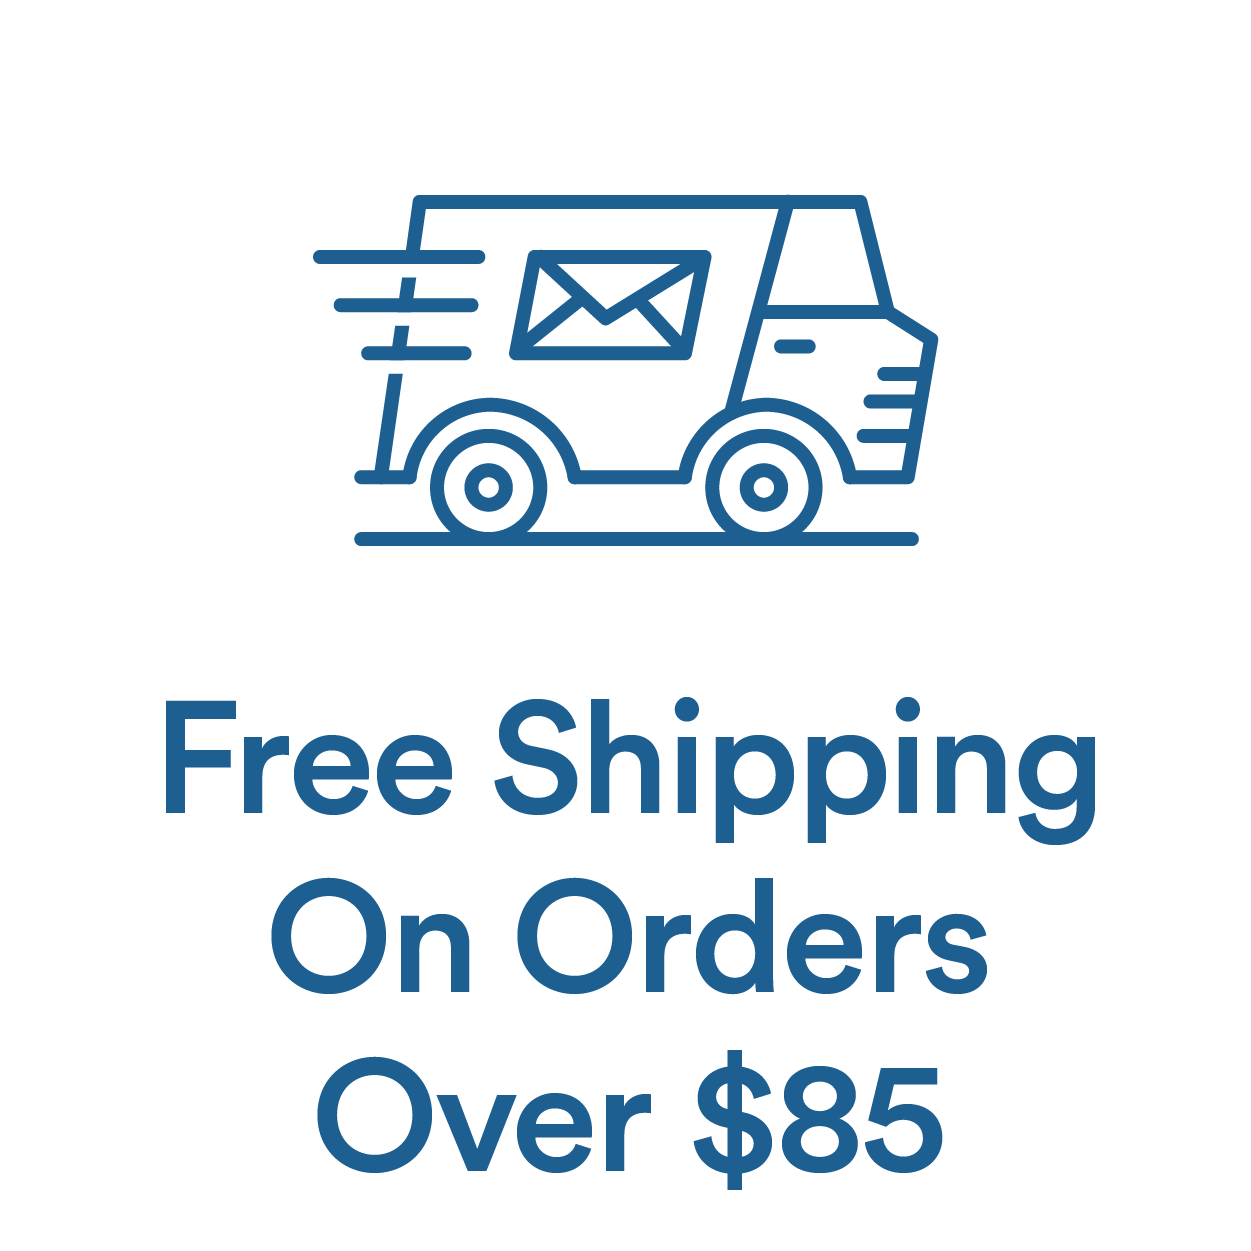 Free Shipping Over $85